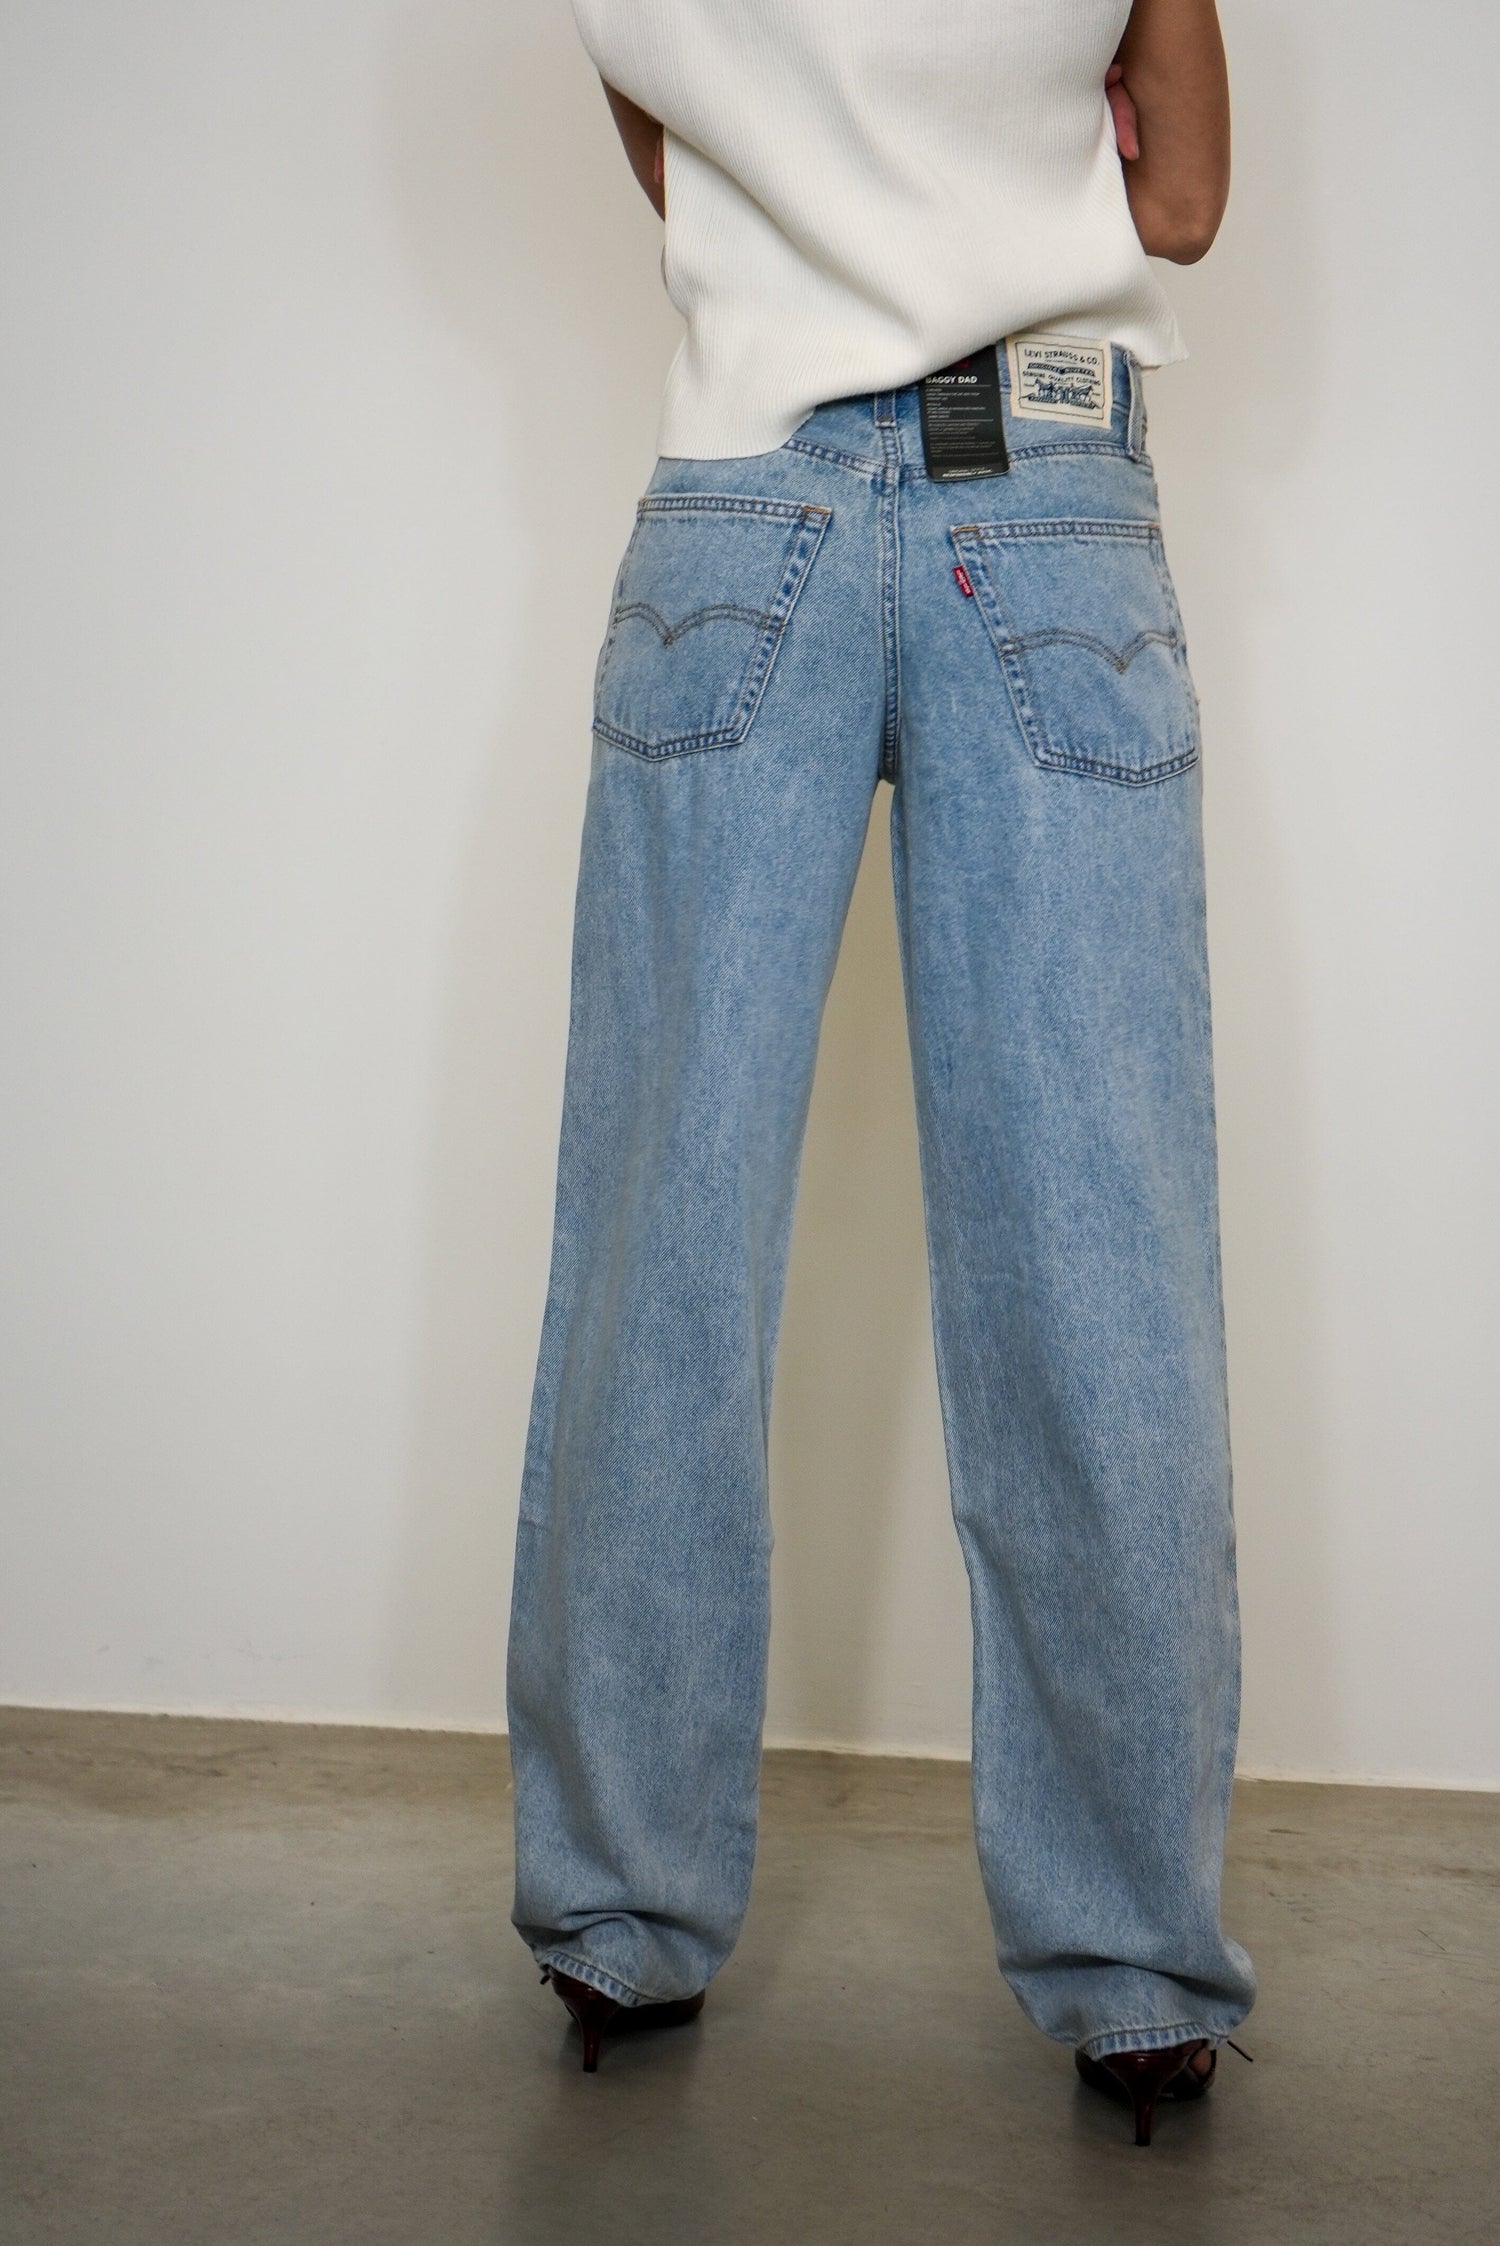 BAGGY DAD JEANS IN MAKE A DIFFERENCE JEANS LEVIS 